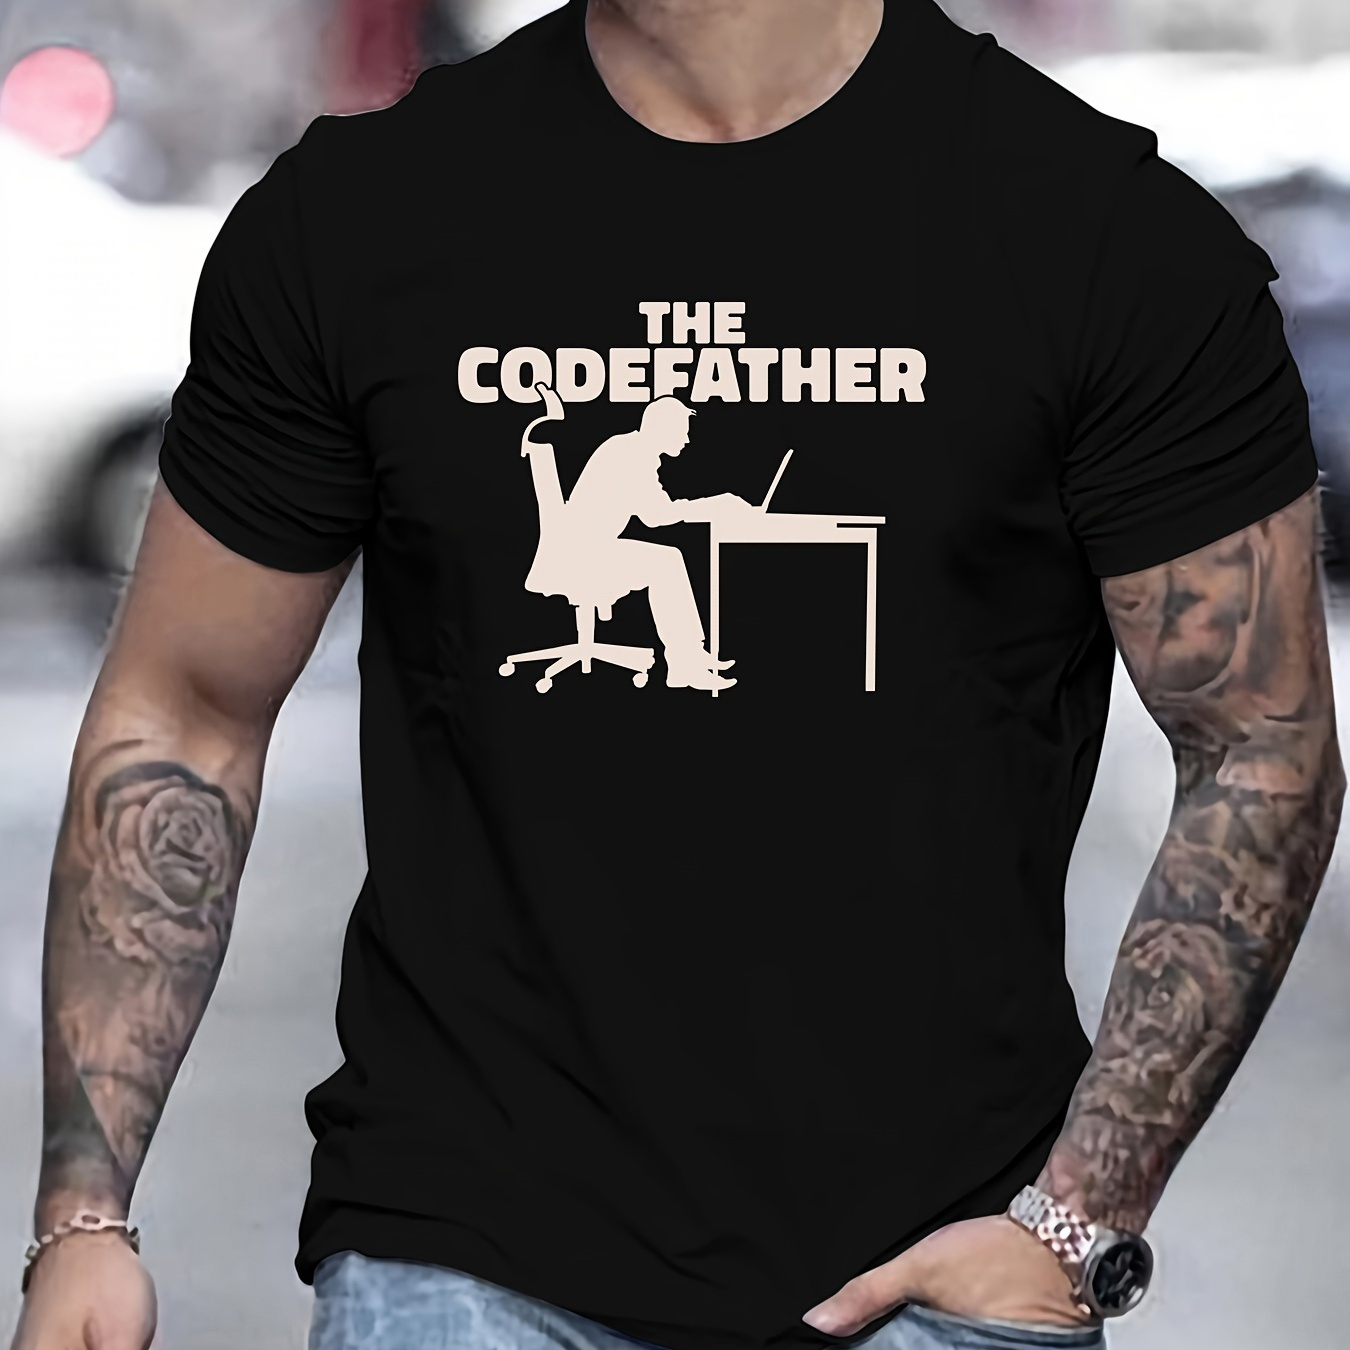 

The Codefather And Programmer Graphic Print, Men's Comfy Cotton T-shirt, Casual Fit Tee, Cool Top Clothing For Men For Summer For Everyday Activities